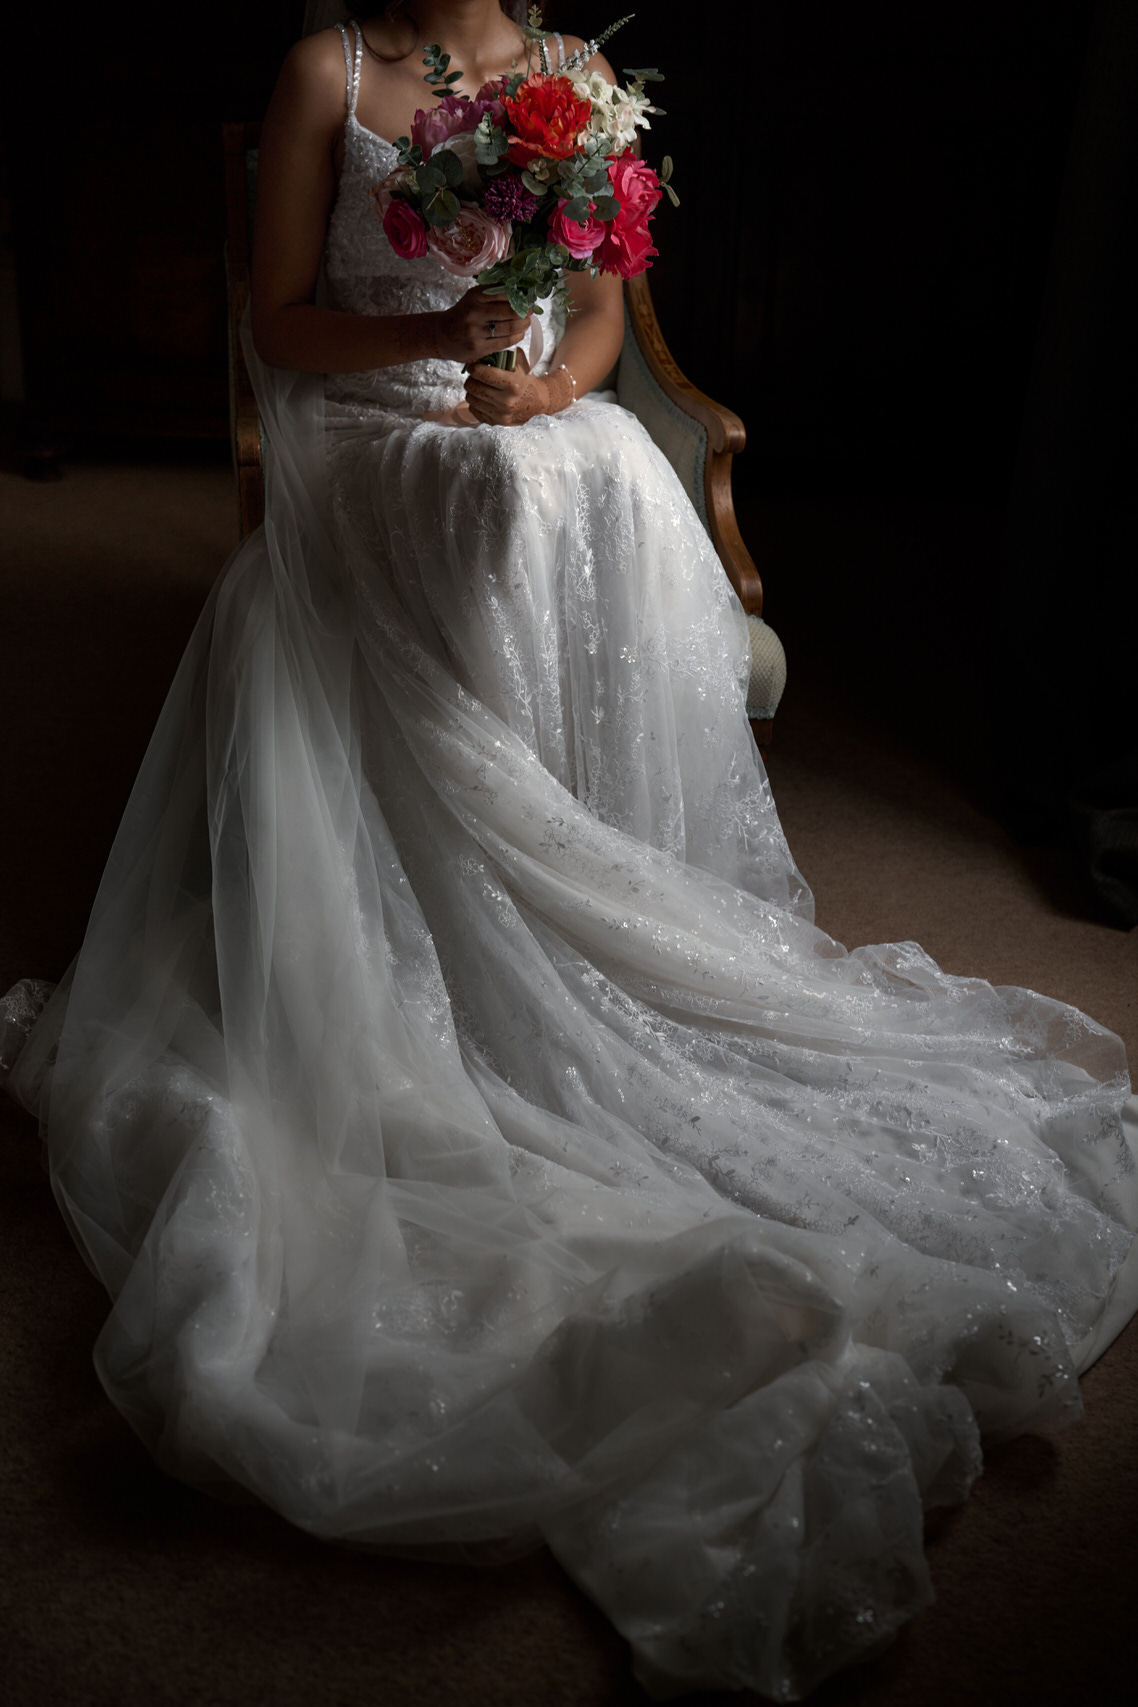 A woman in a wedding dress is sitting and holding flowers.